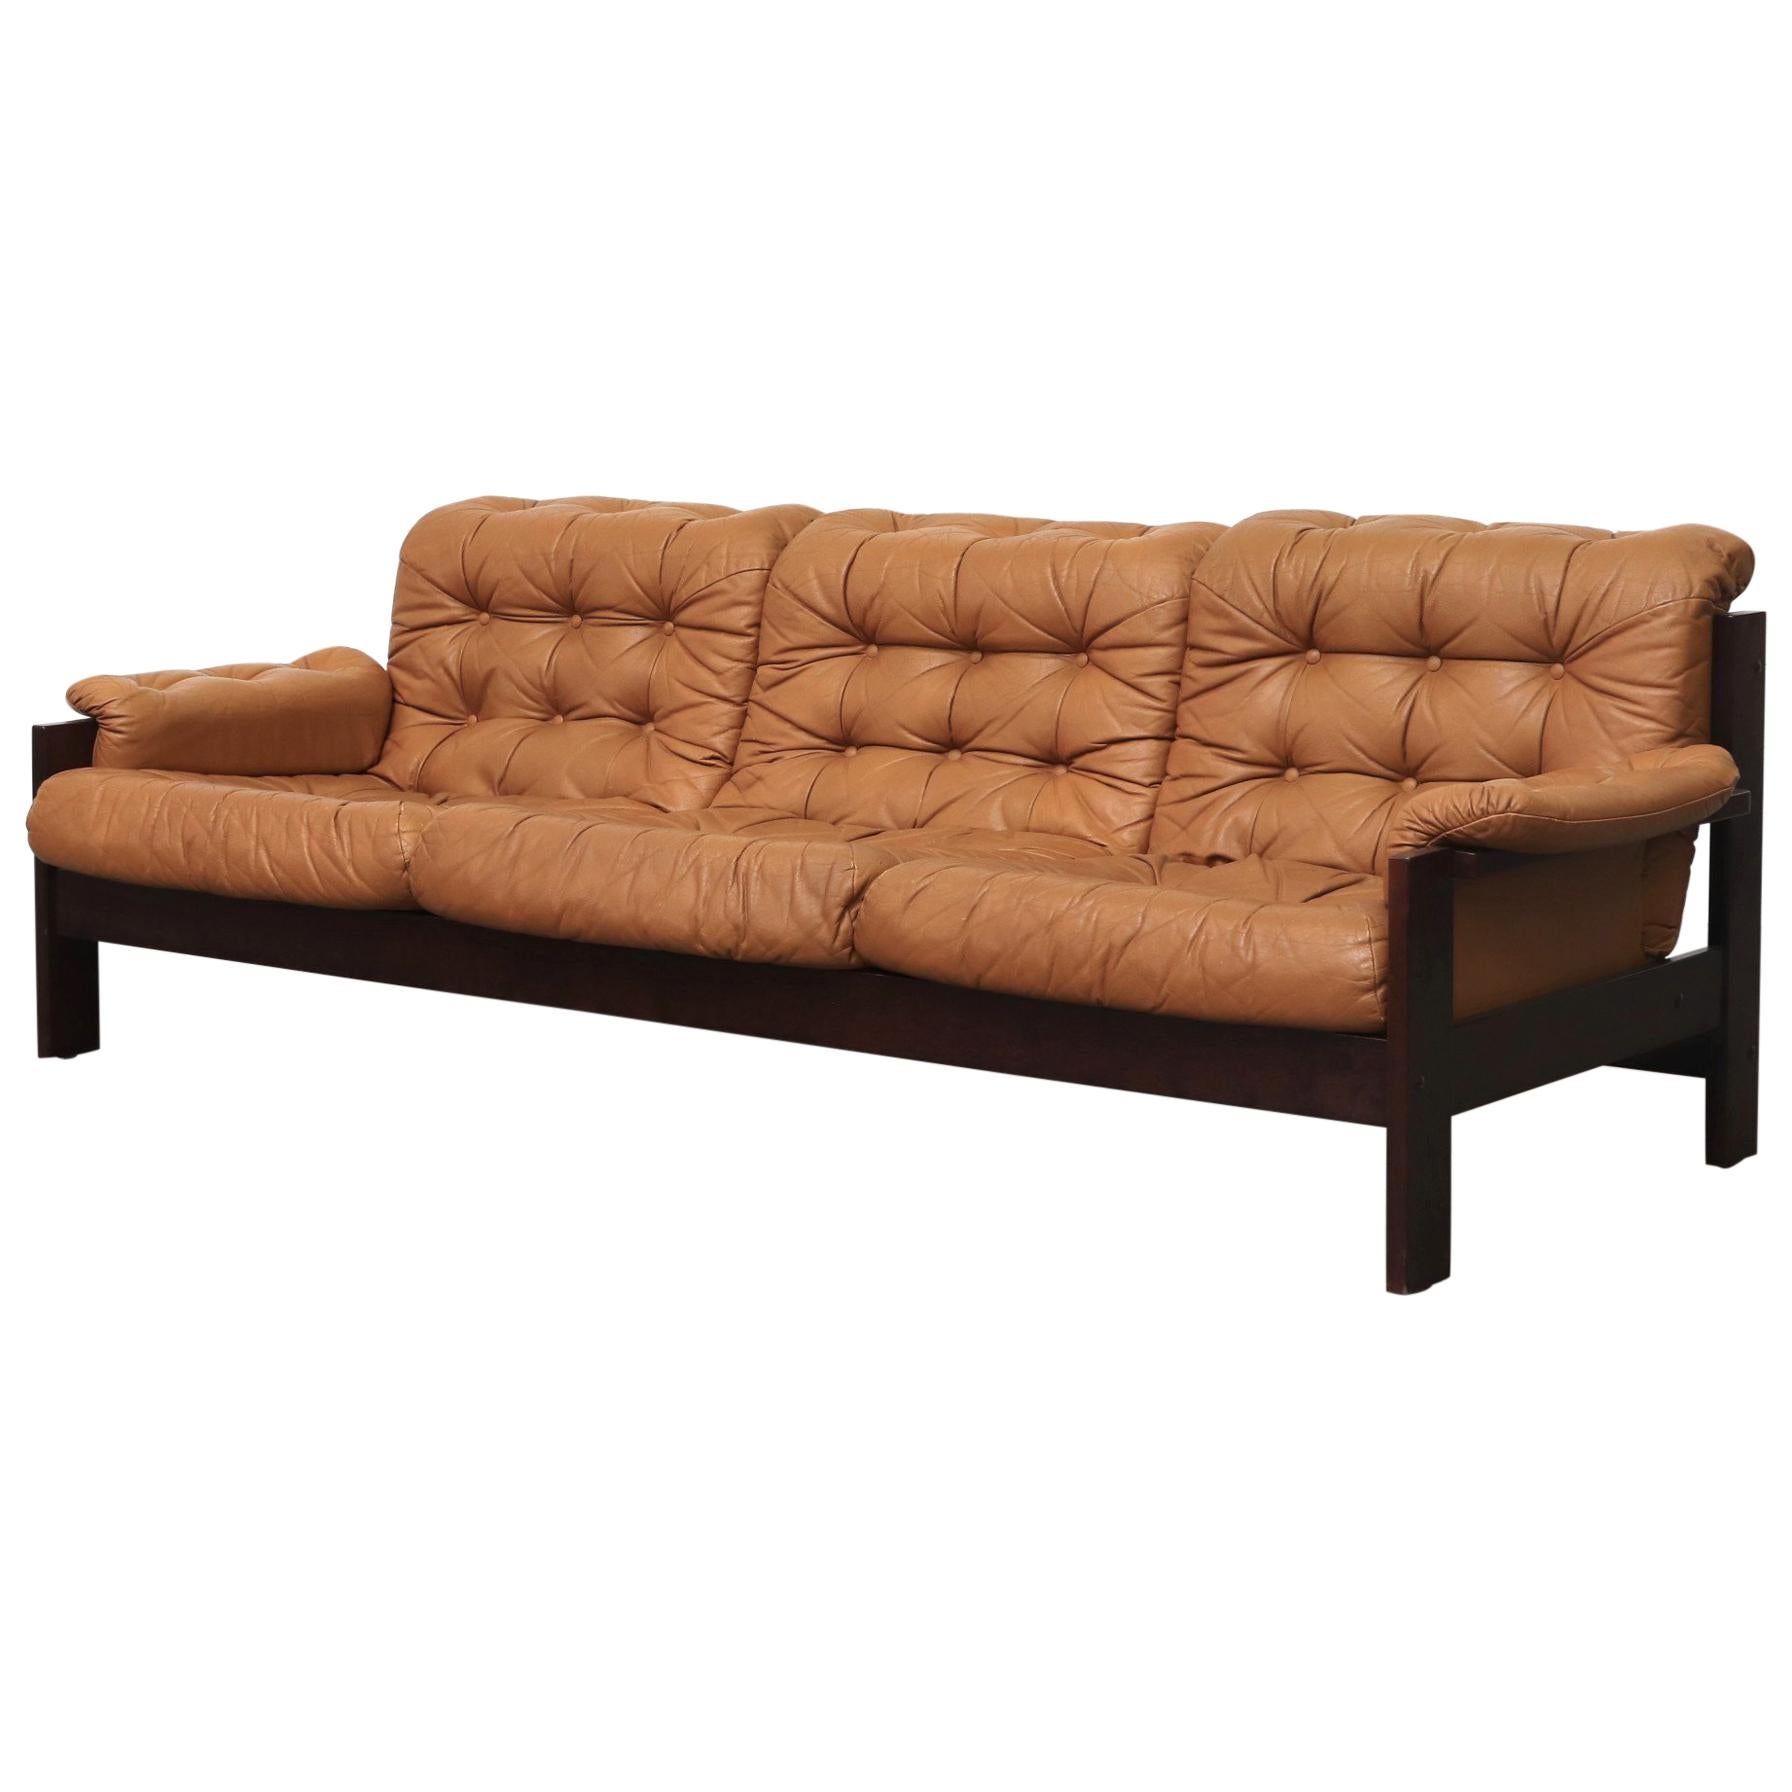 Arne Norell Inspired Butterscotch Tufted Leather Sofa for llums Bolighus